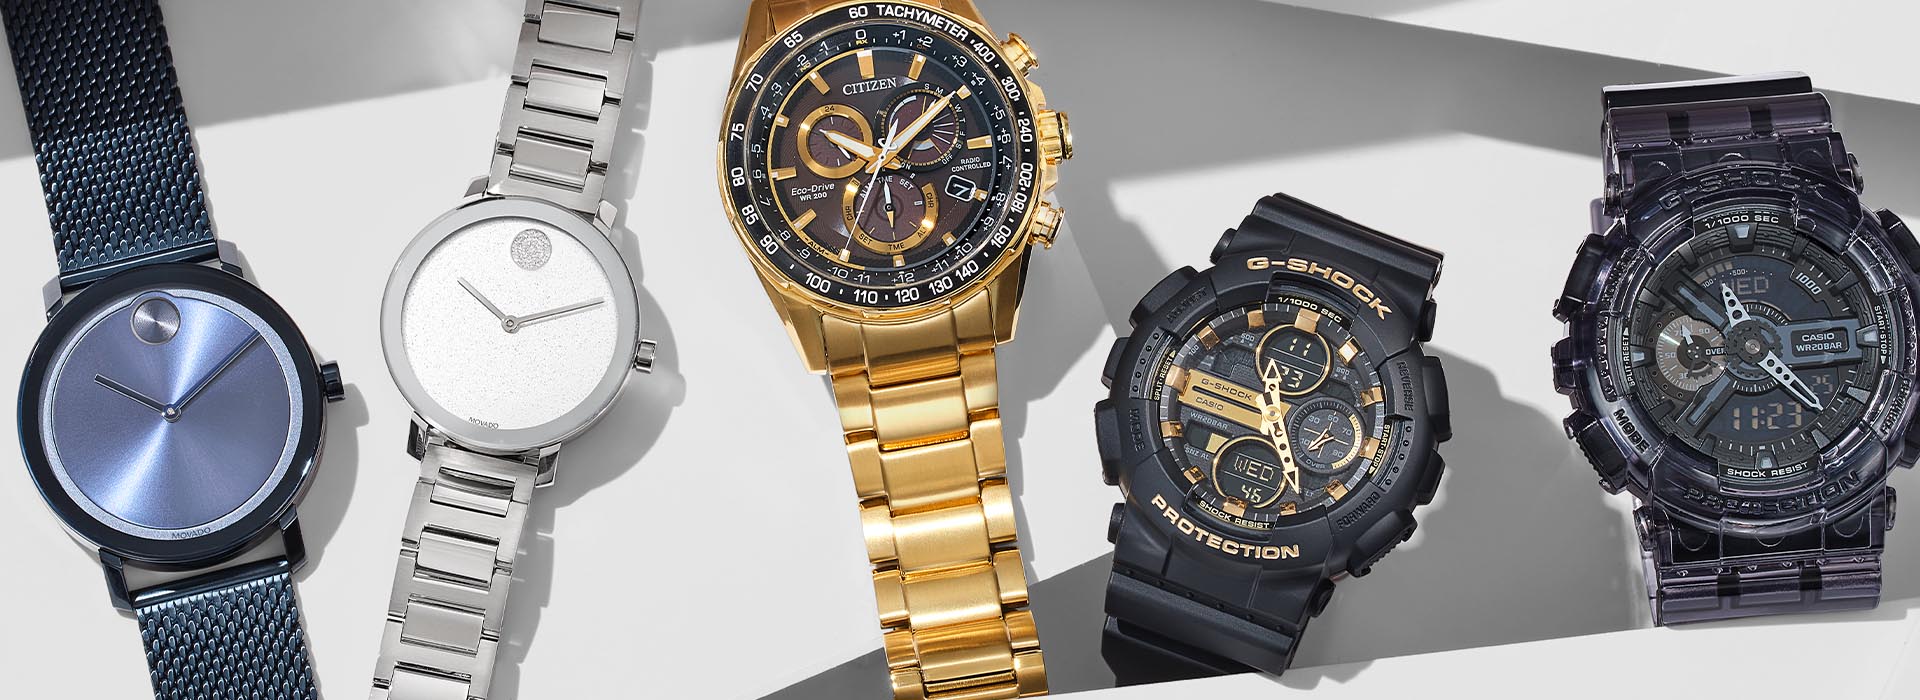 Image of various watches from Movado, Citizen, and Casio